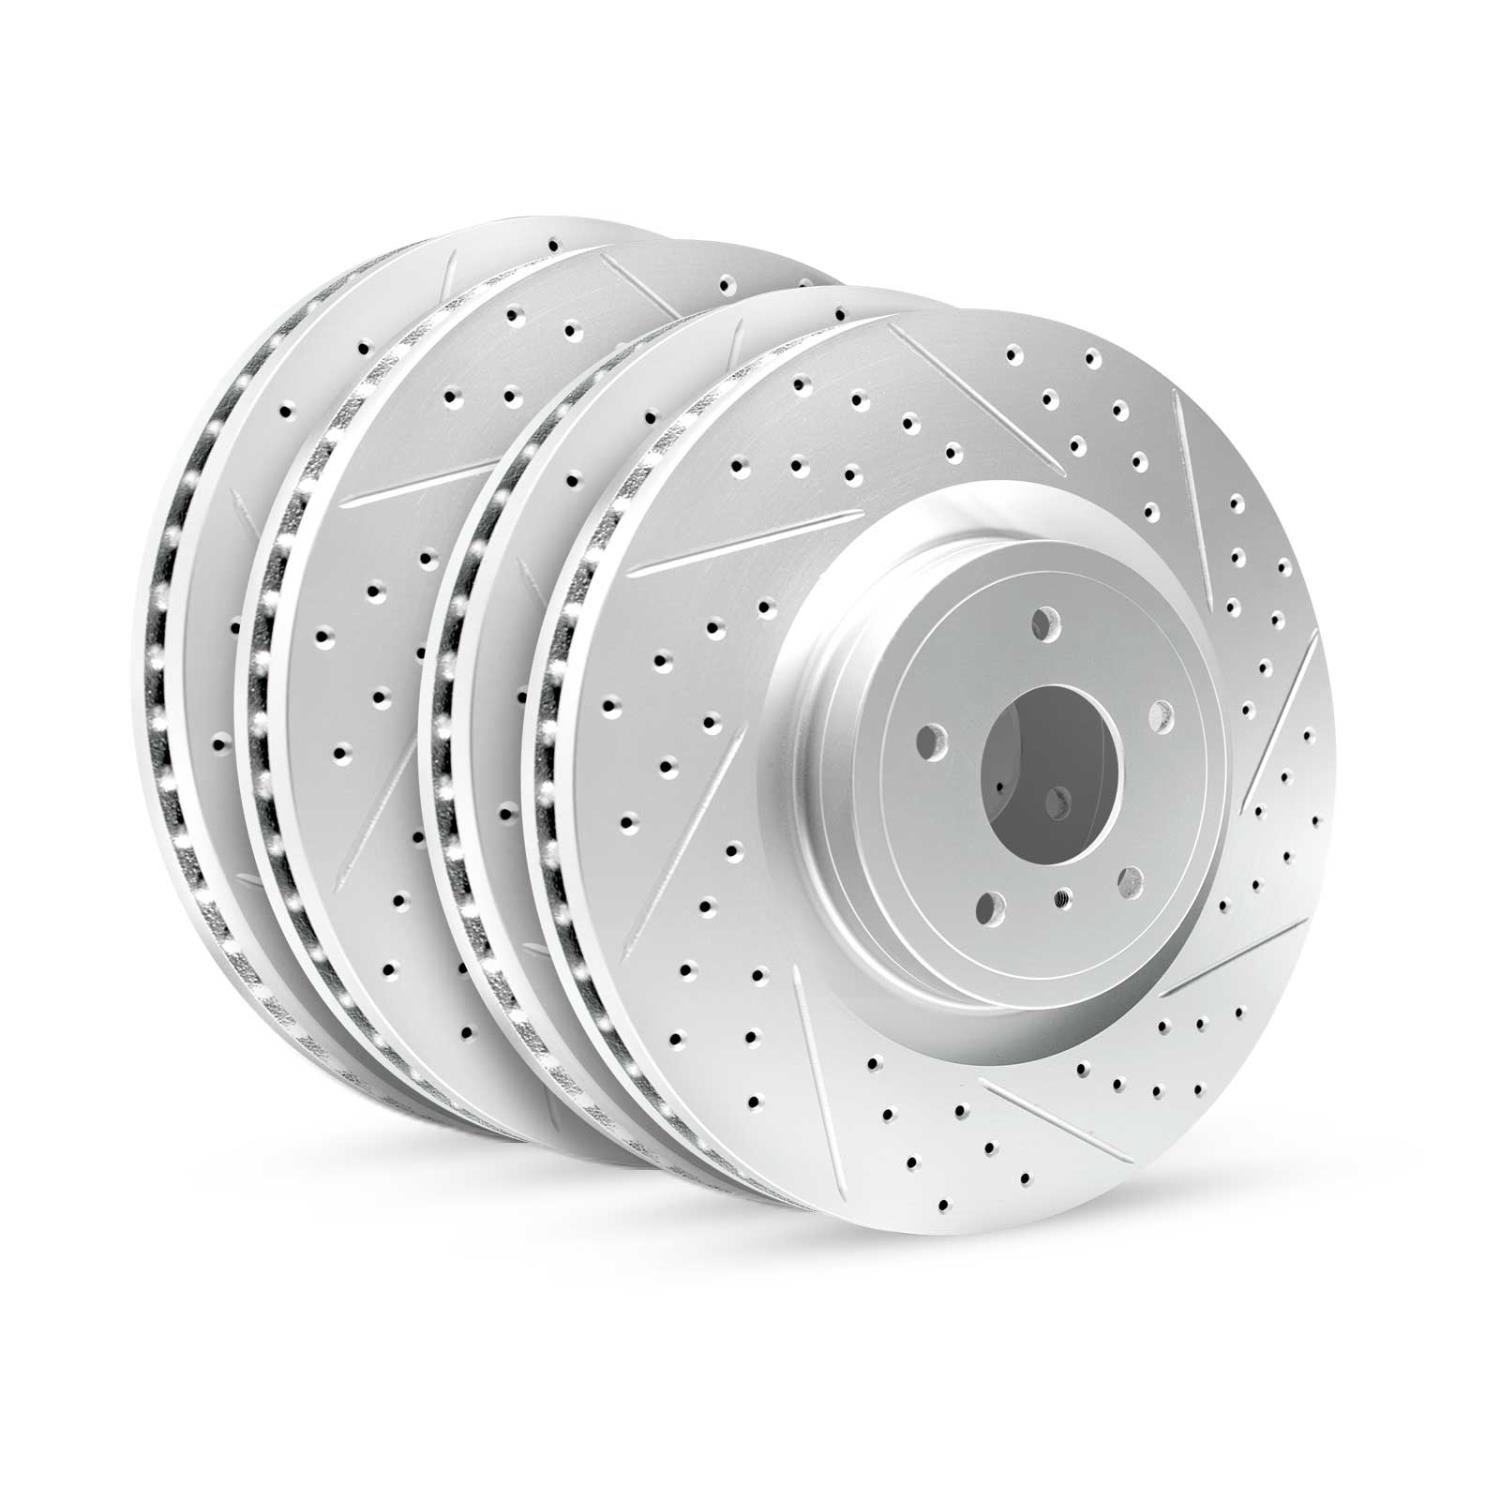 GEO-Carbon Drilled/Slotted Rotors, Fits Select Land Rover, Position: Front/Rear